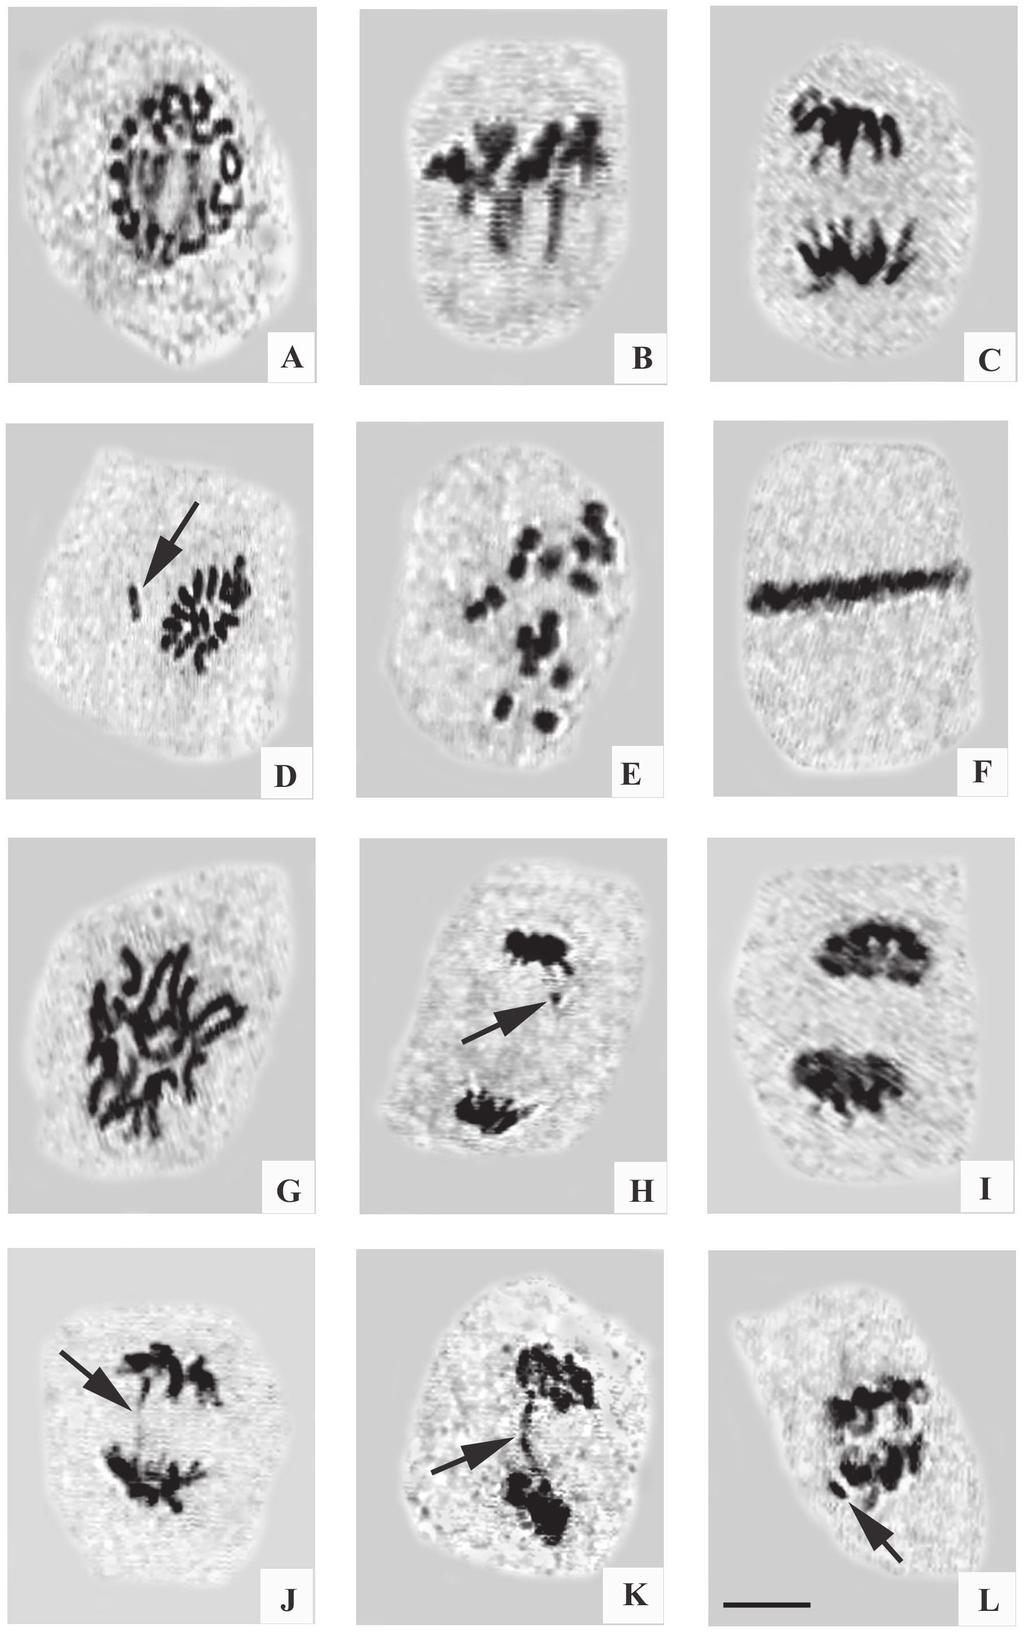 82 KUMAR AND DWIVEDI Fig. 1. Effects of heavy metals in chromosomes of Trachyspermum ammi (L.) Sprague. A. Prophase., B. Normal metaphase (2n=18). C. Normal anaphase (18:18). D. Precocious movement of chromosome at metaphase.